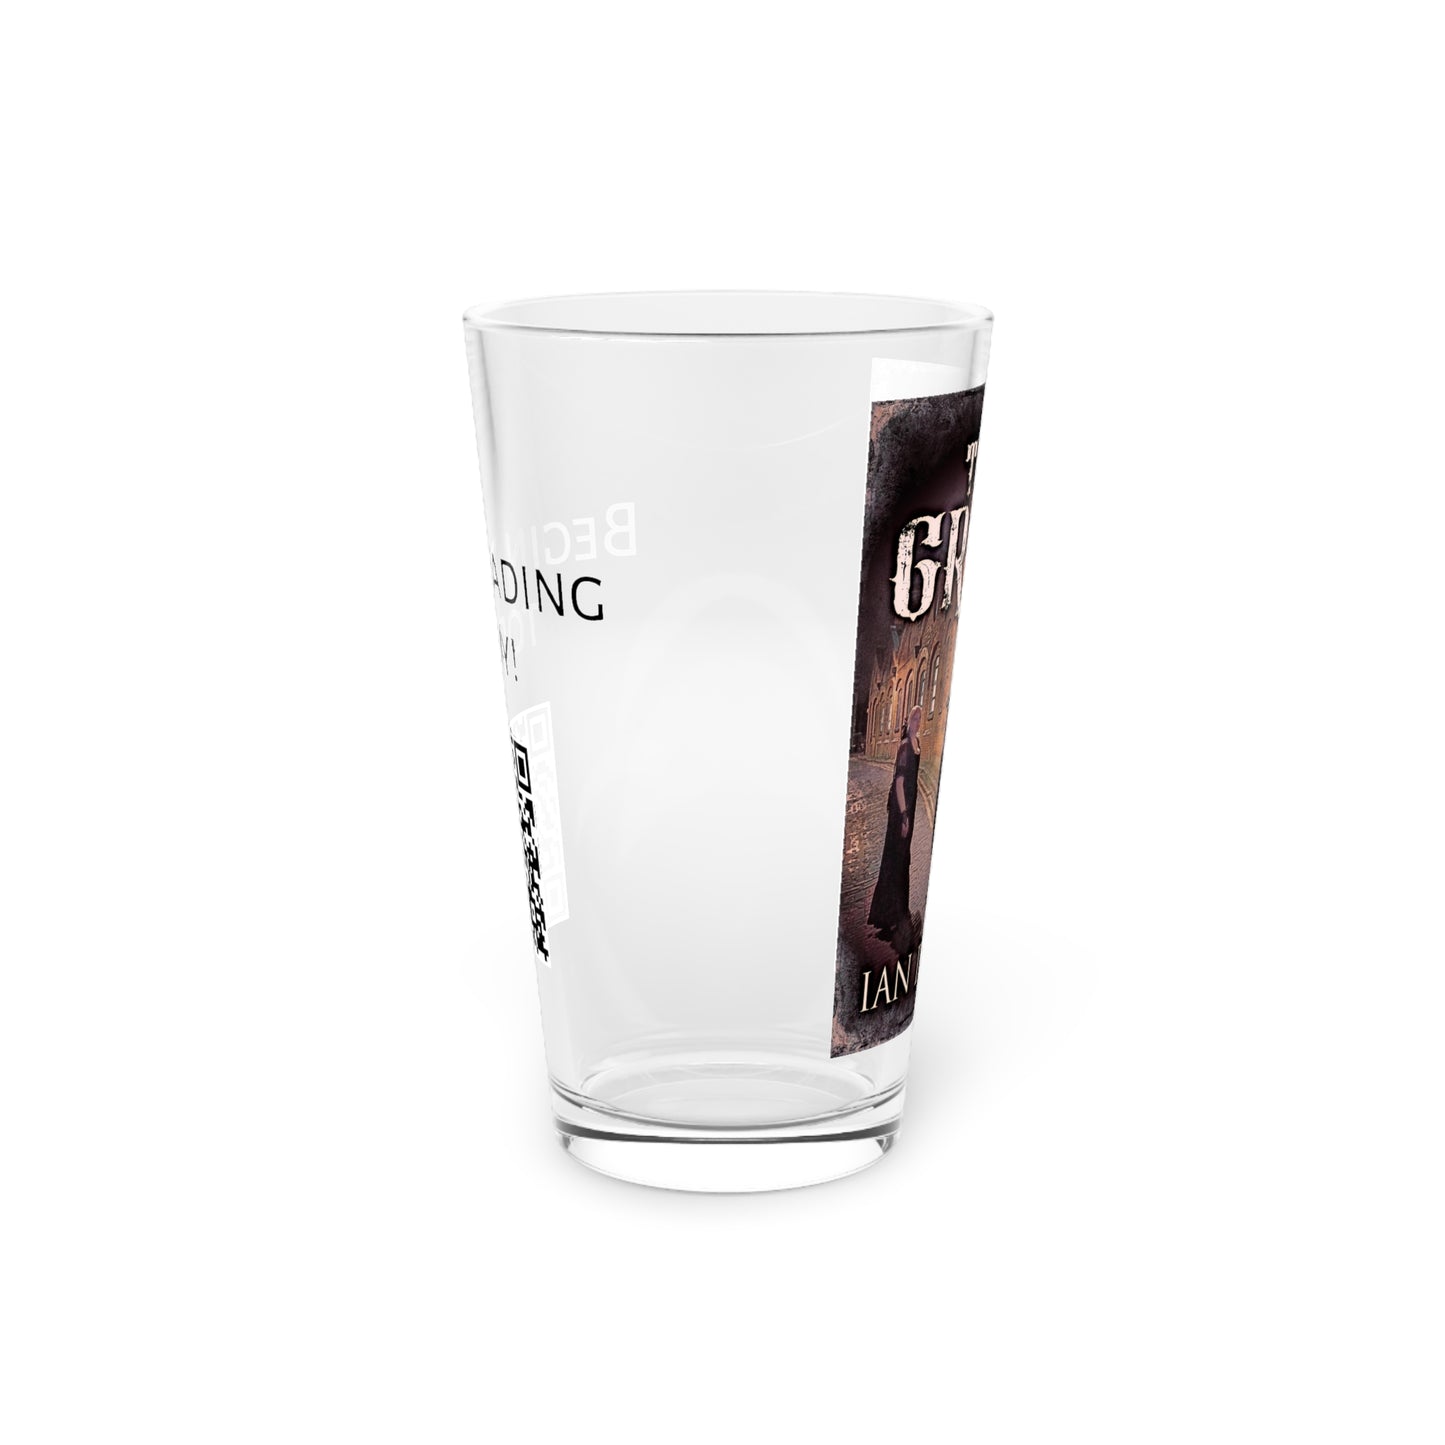 The Grind - Pint Glass